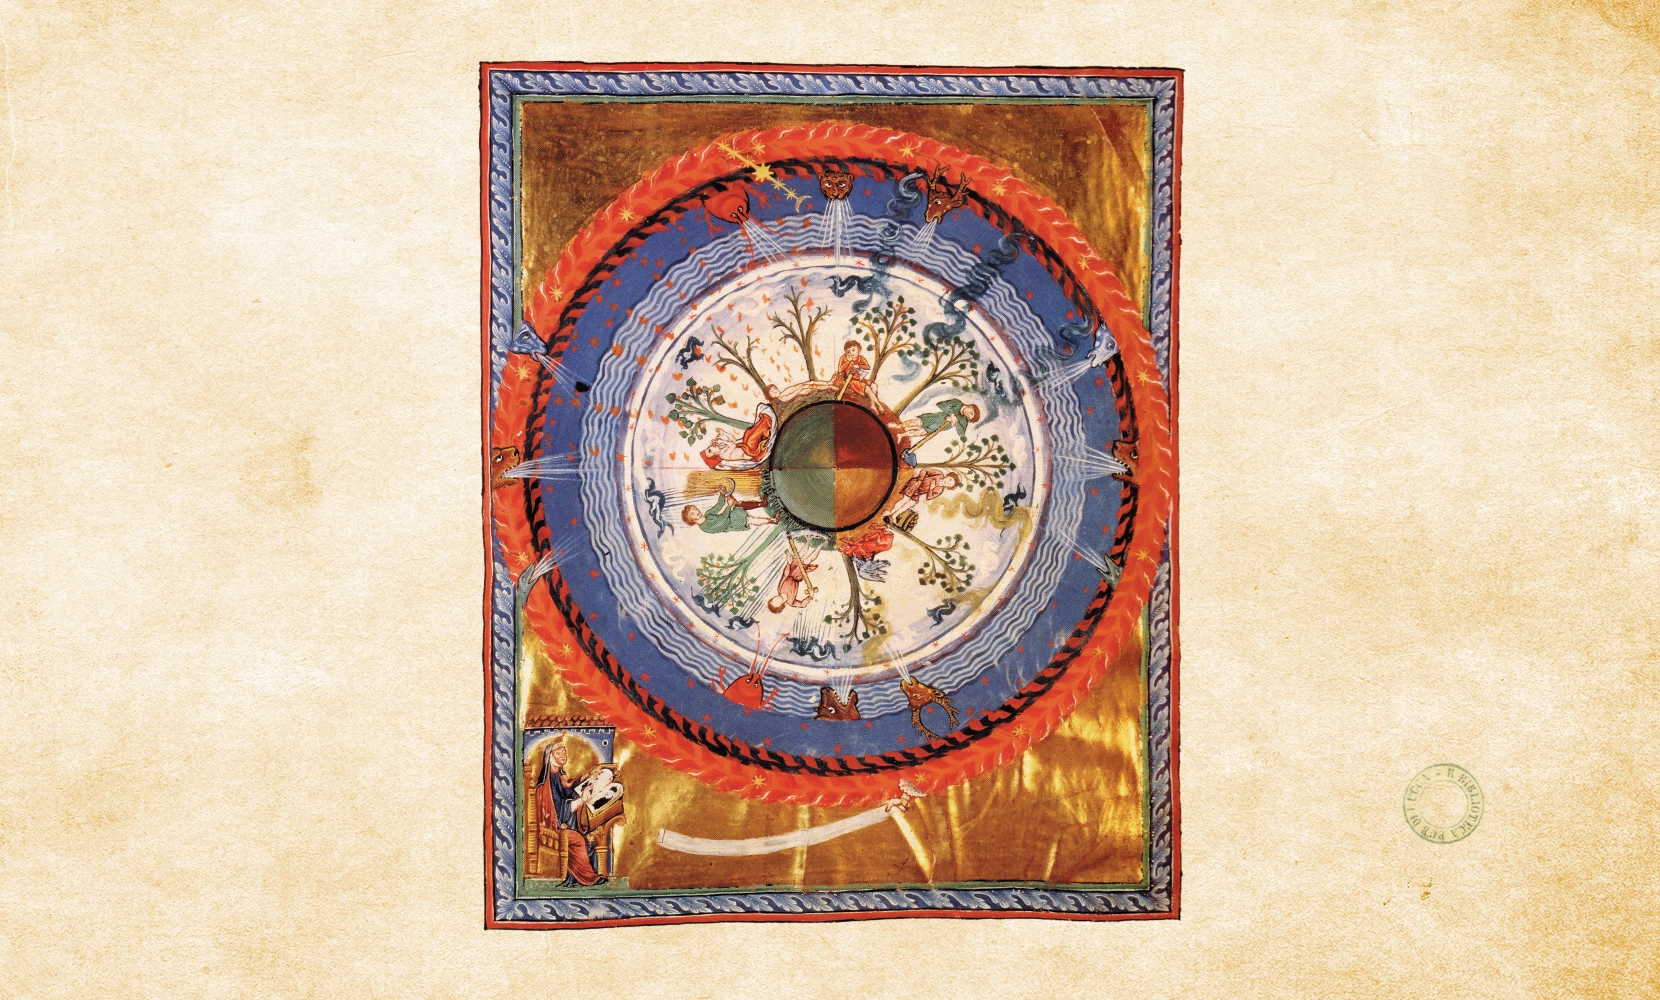 The Circle of Life from Book of Divine Works by Hildegard of Bingen, 1163–1174